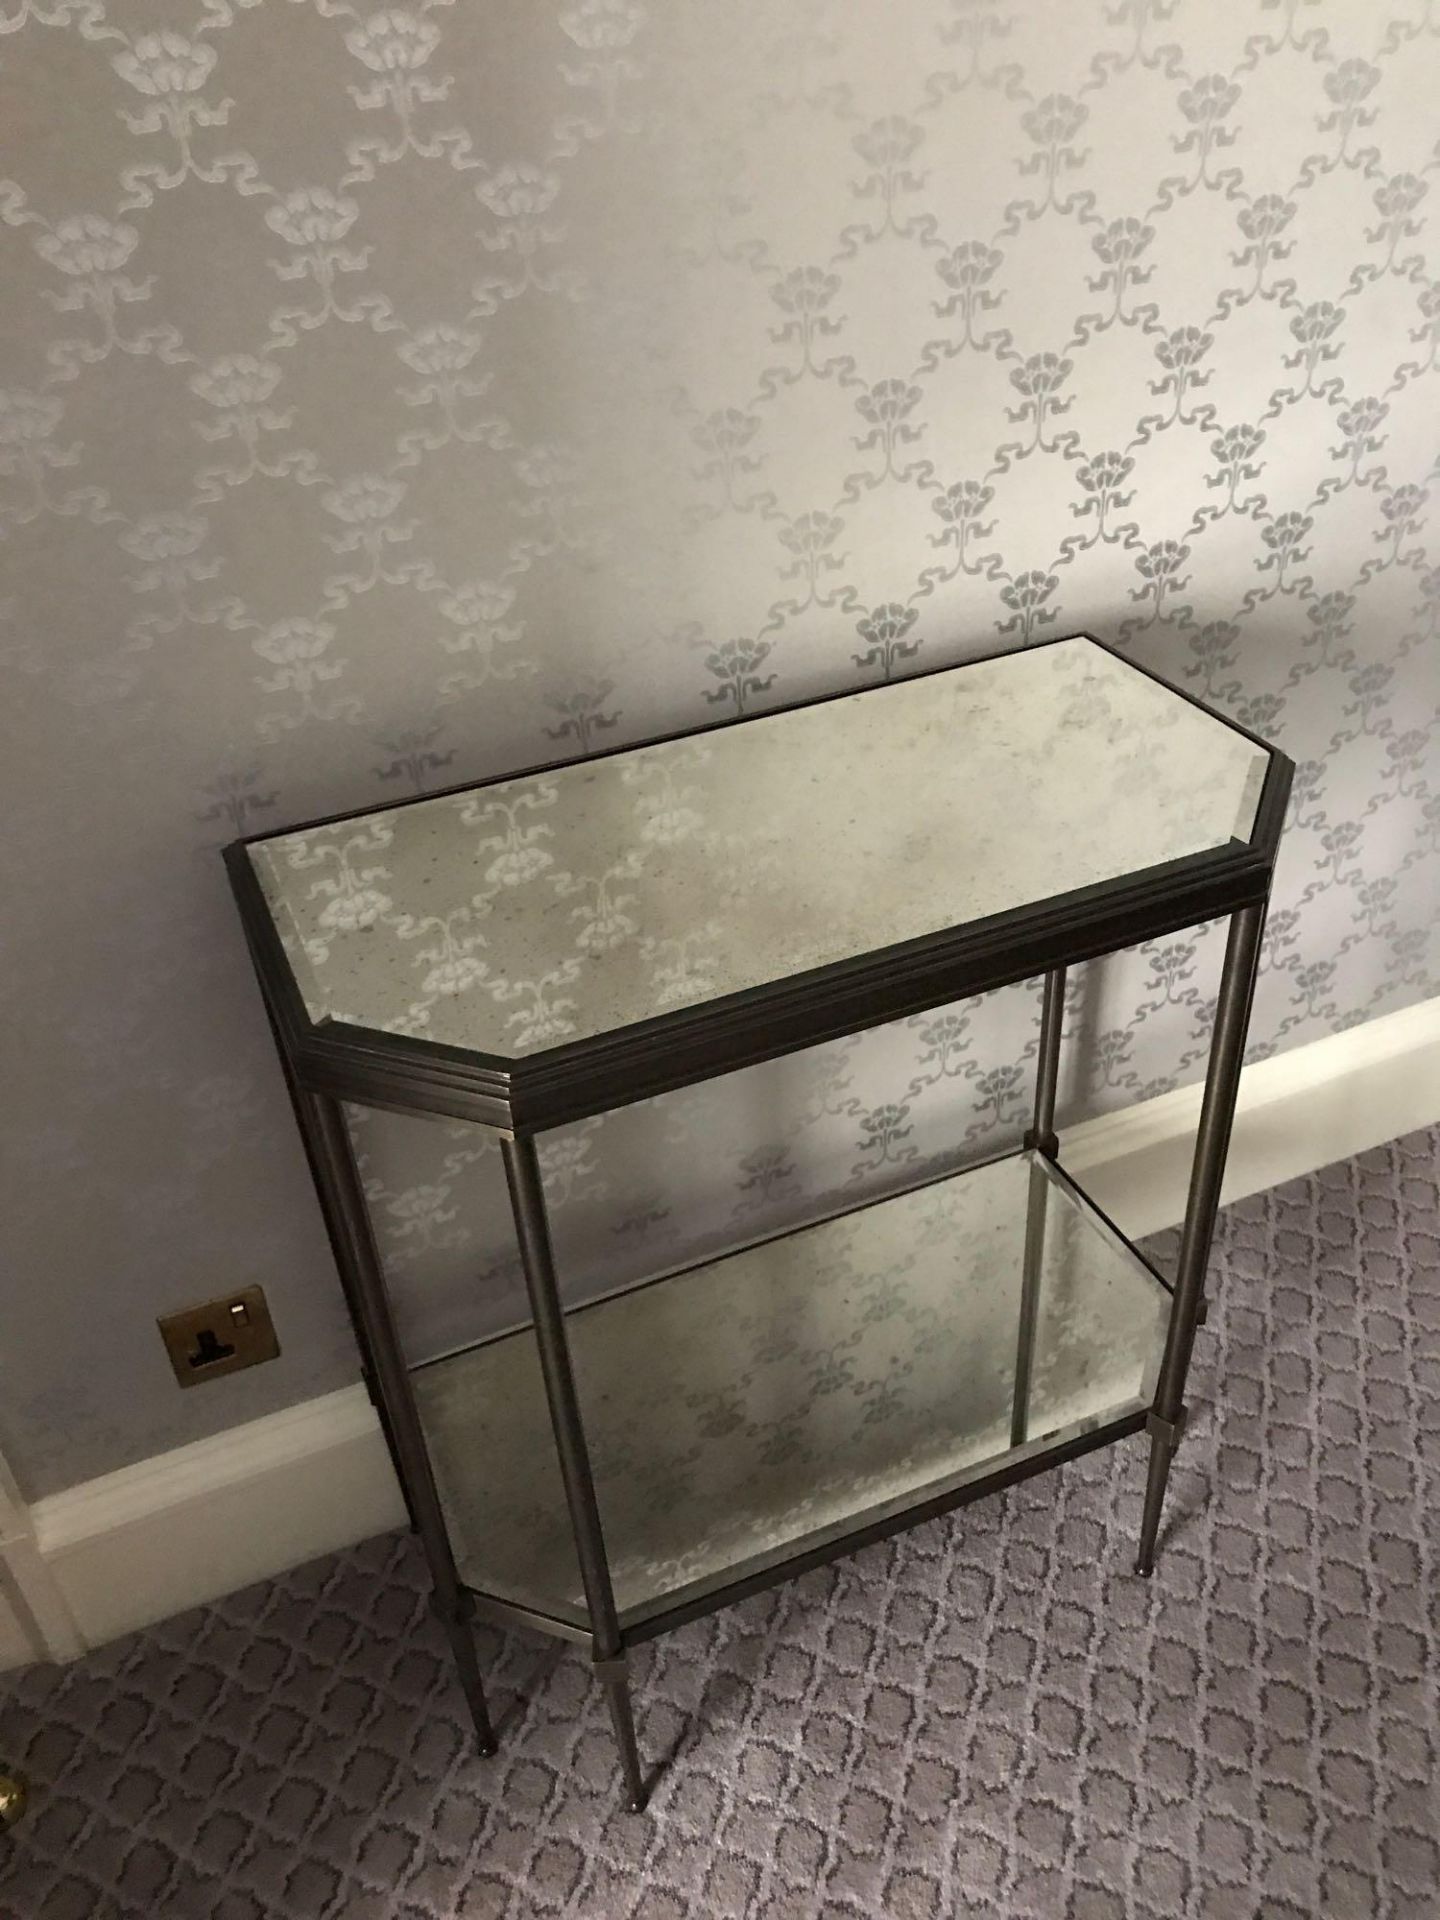 A Two Tier Console Table With Bevelled And Mottled Mirror Tops Mounted On A Bronze Brass Frame 70